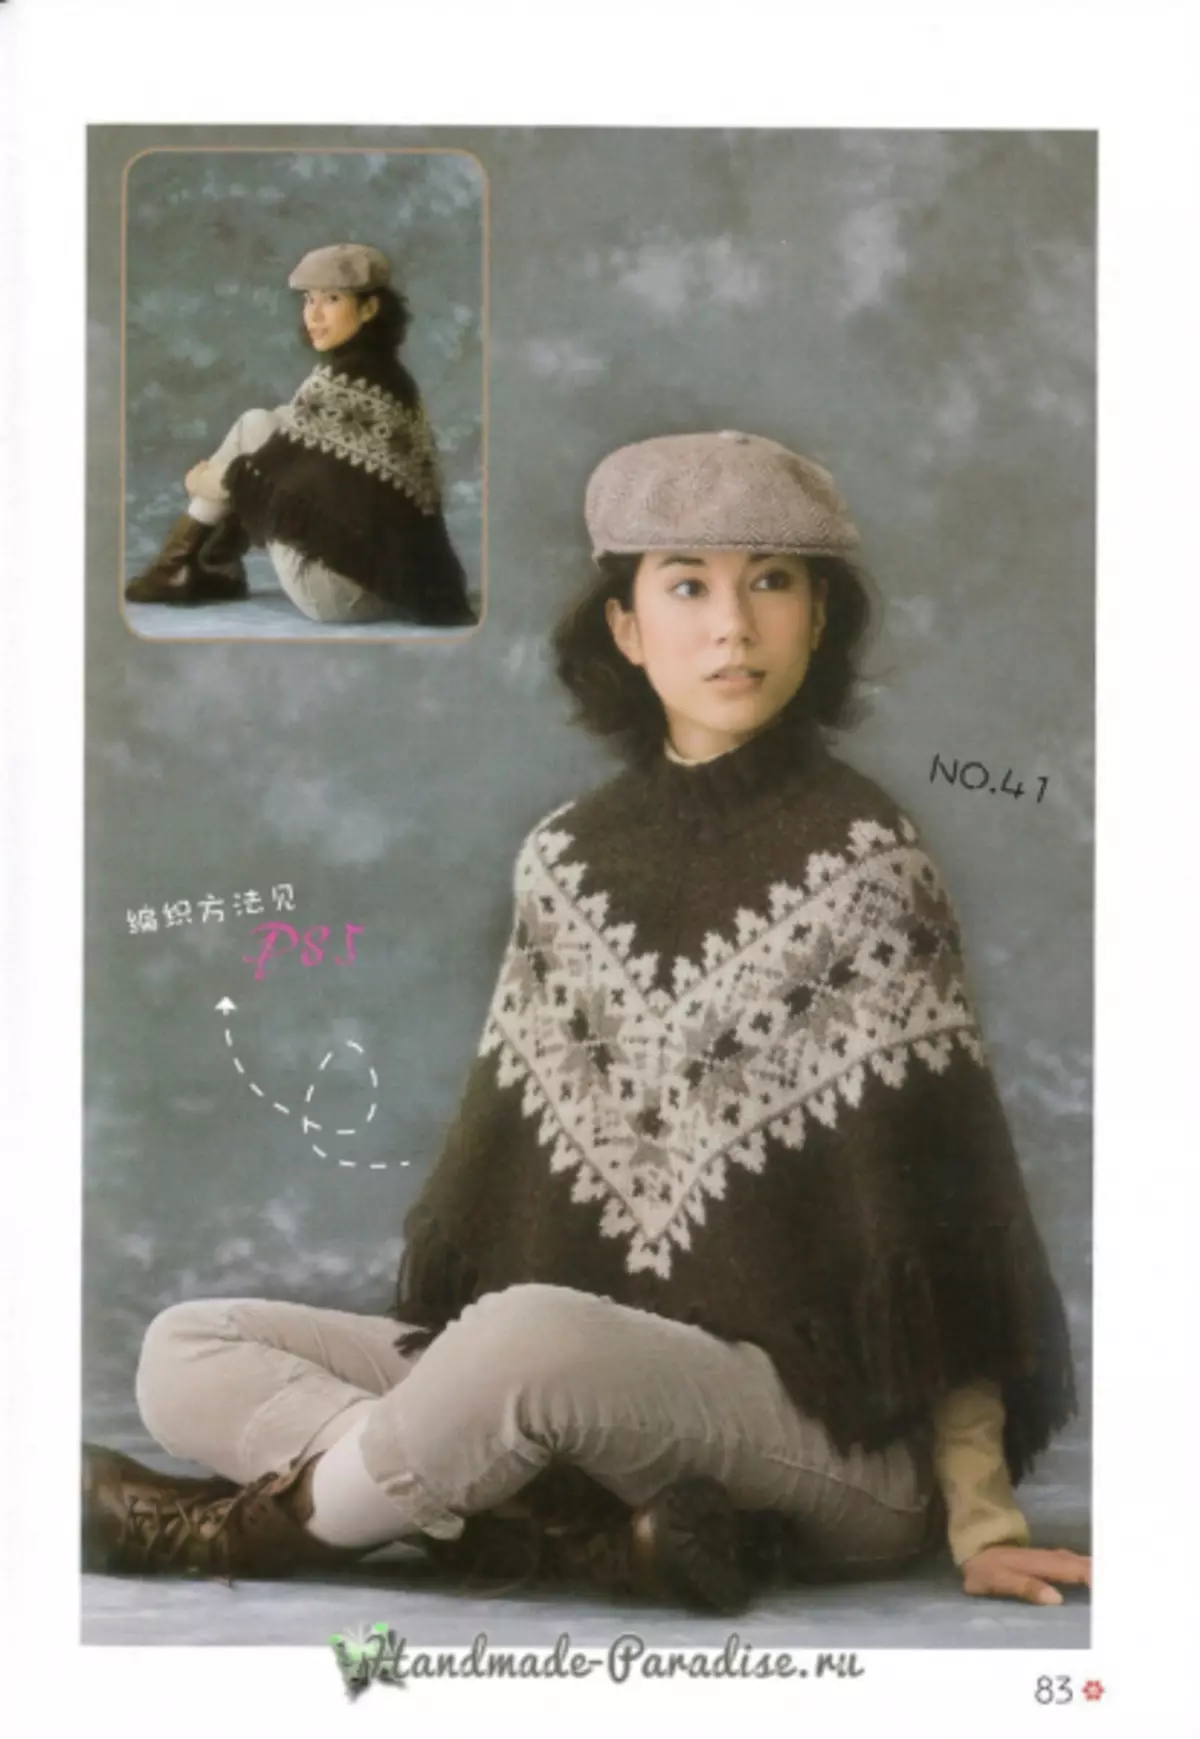 Knitting cape and poncho. Japanese magazine with schemes